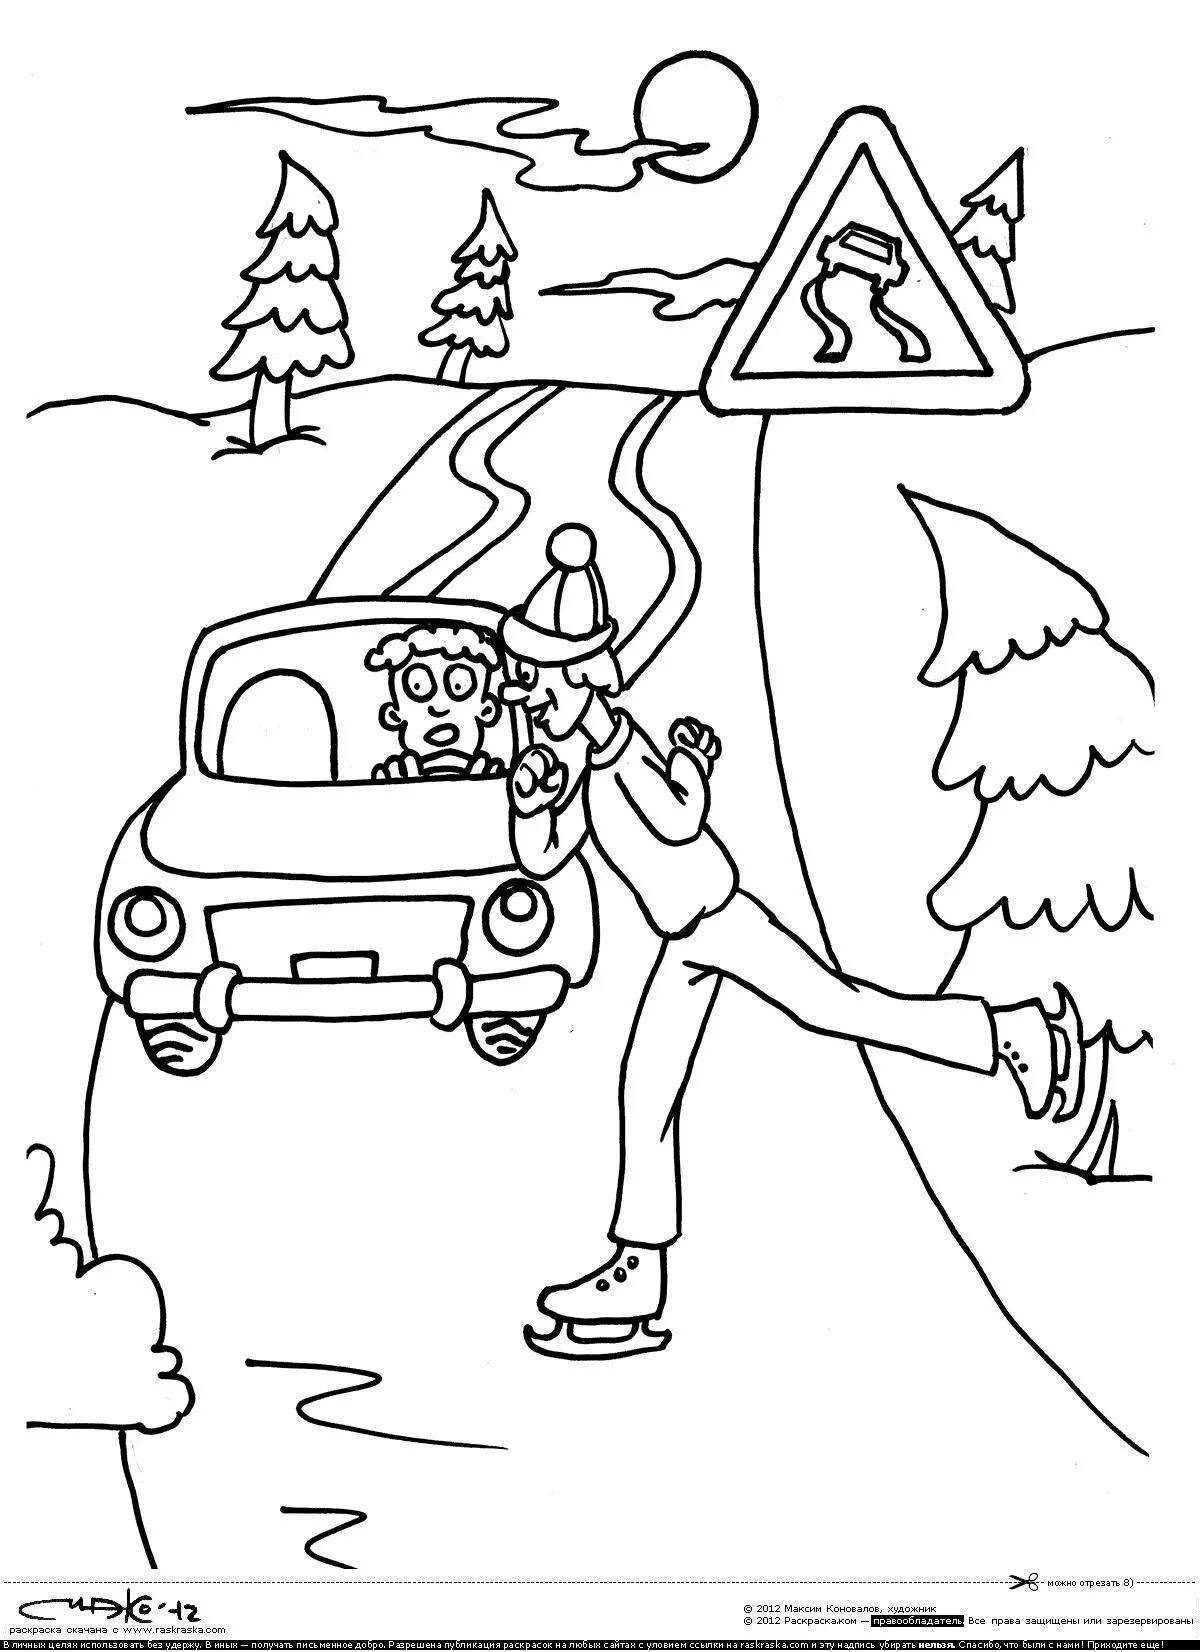 Innovative road safety coloring book